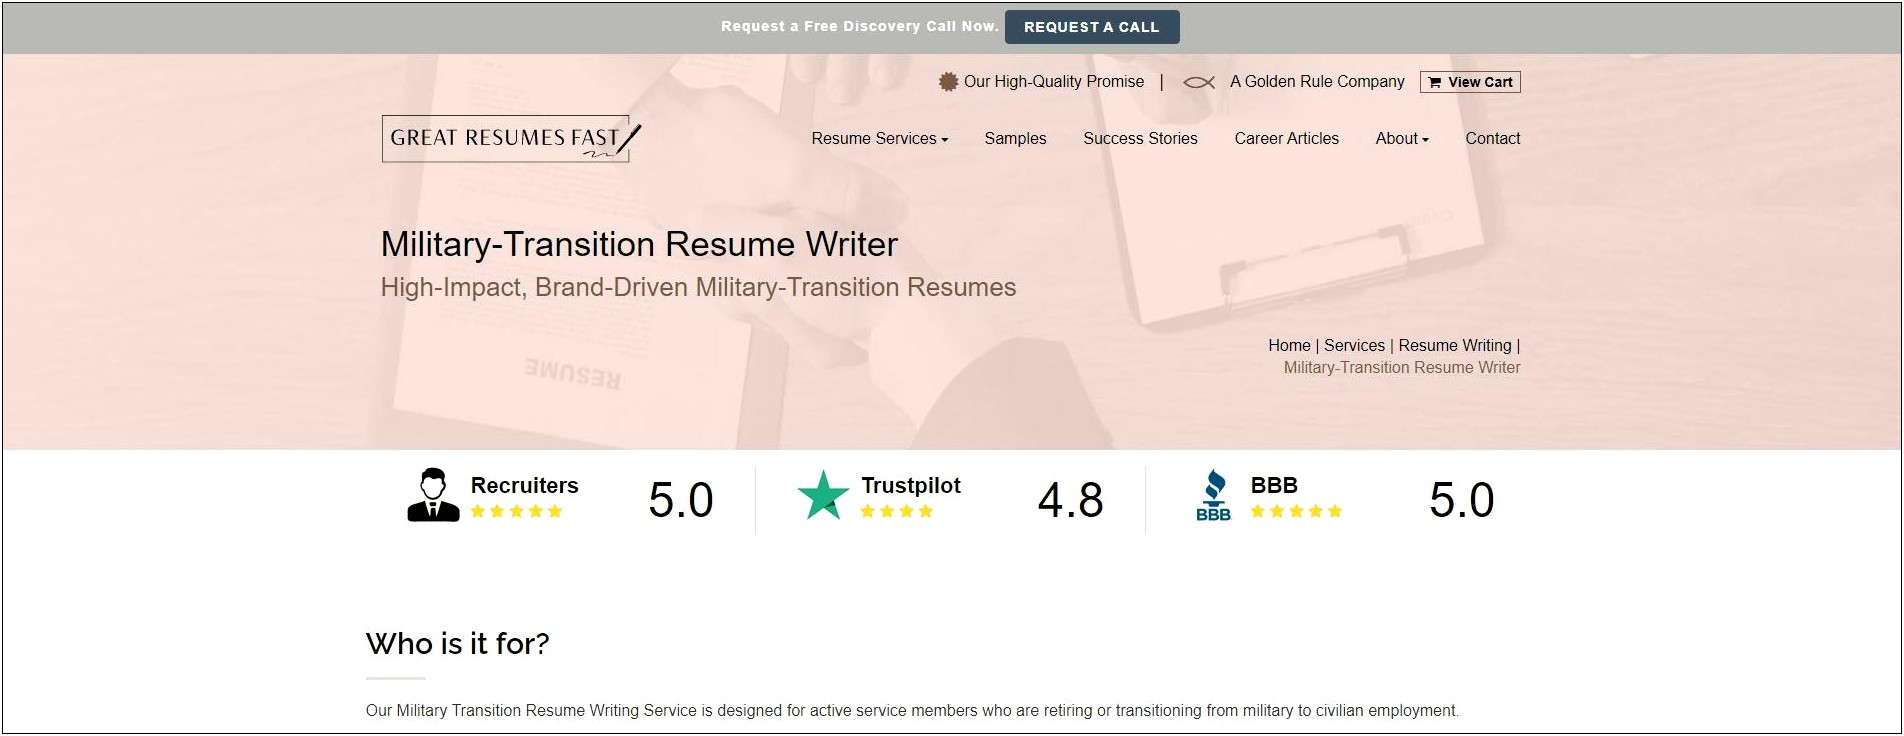 Free Resume Writing Service For Military